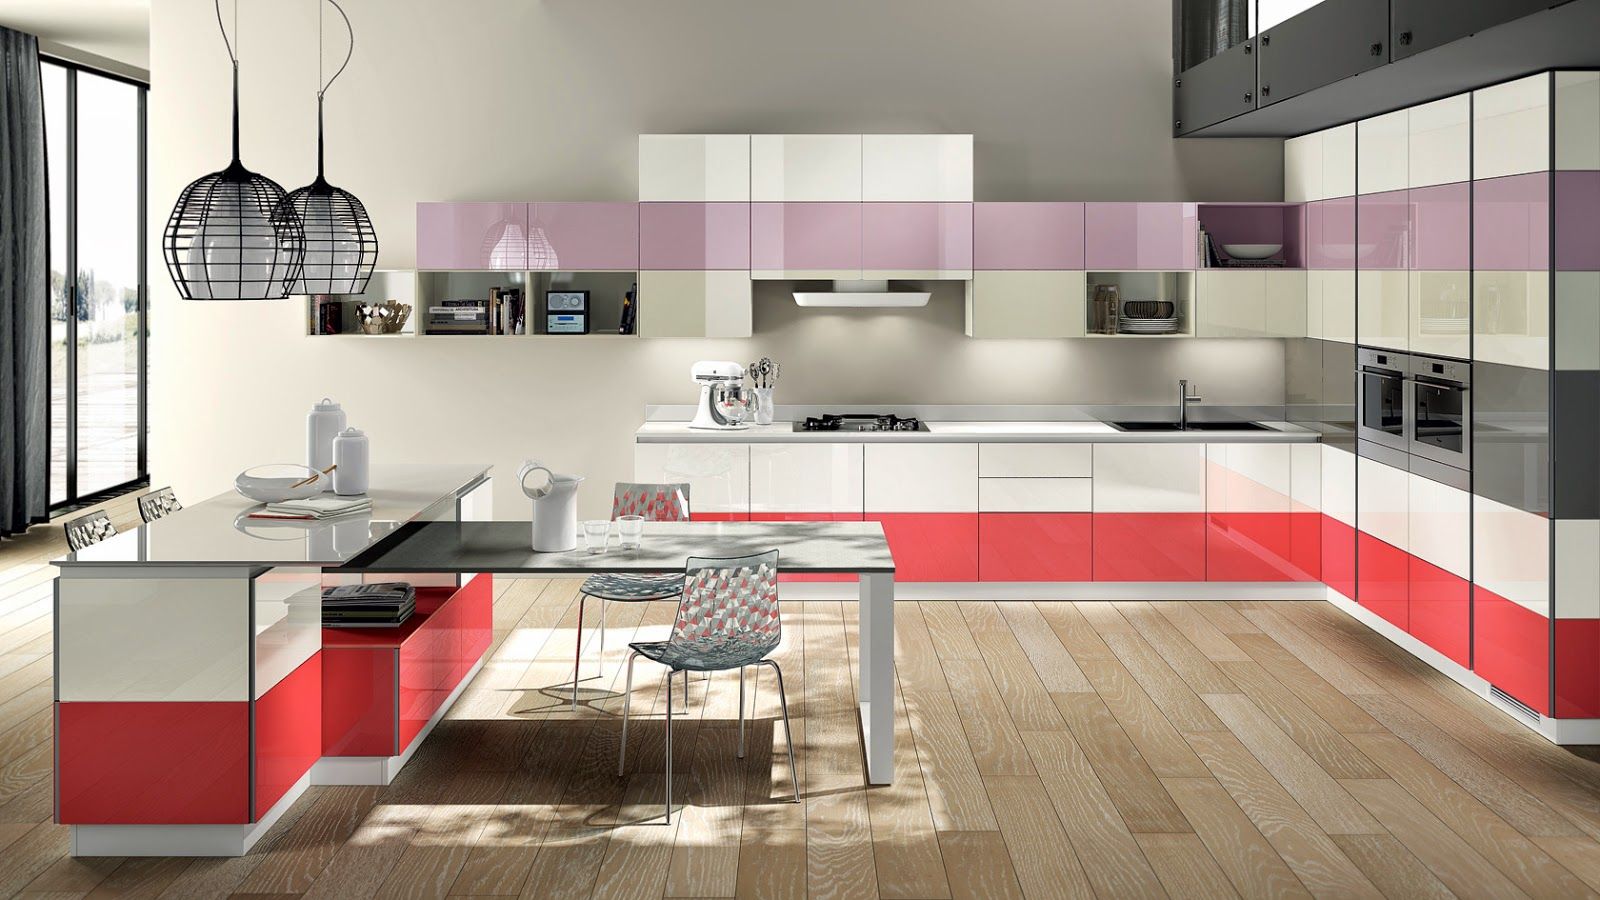 modular kitchen made by color kitchen gallery colors kitchen gallery Modern kitchen MDF